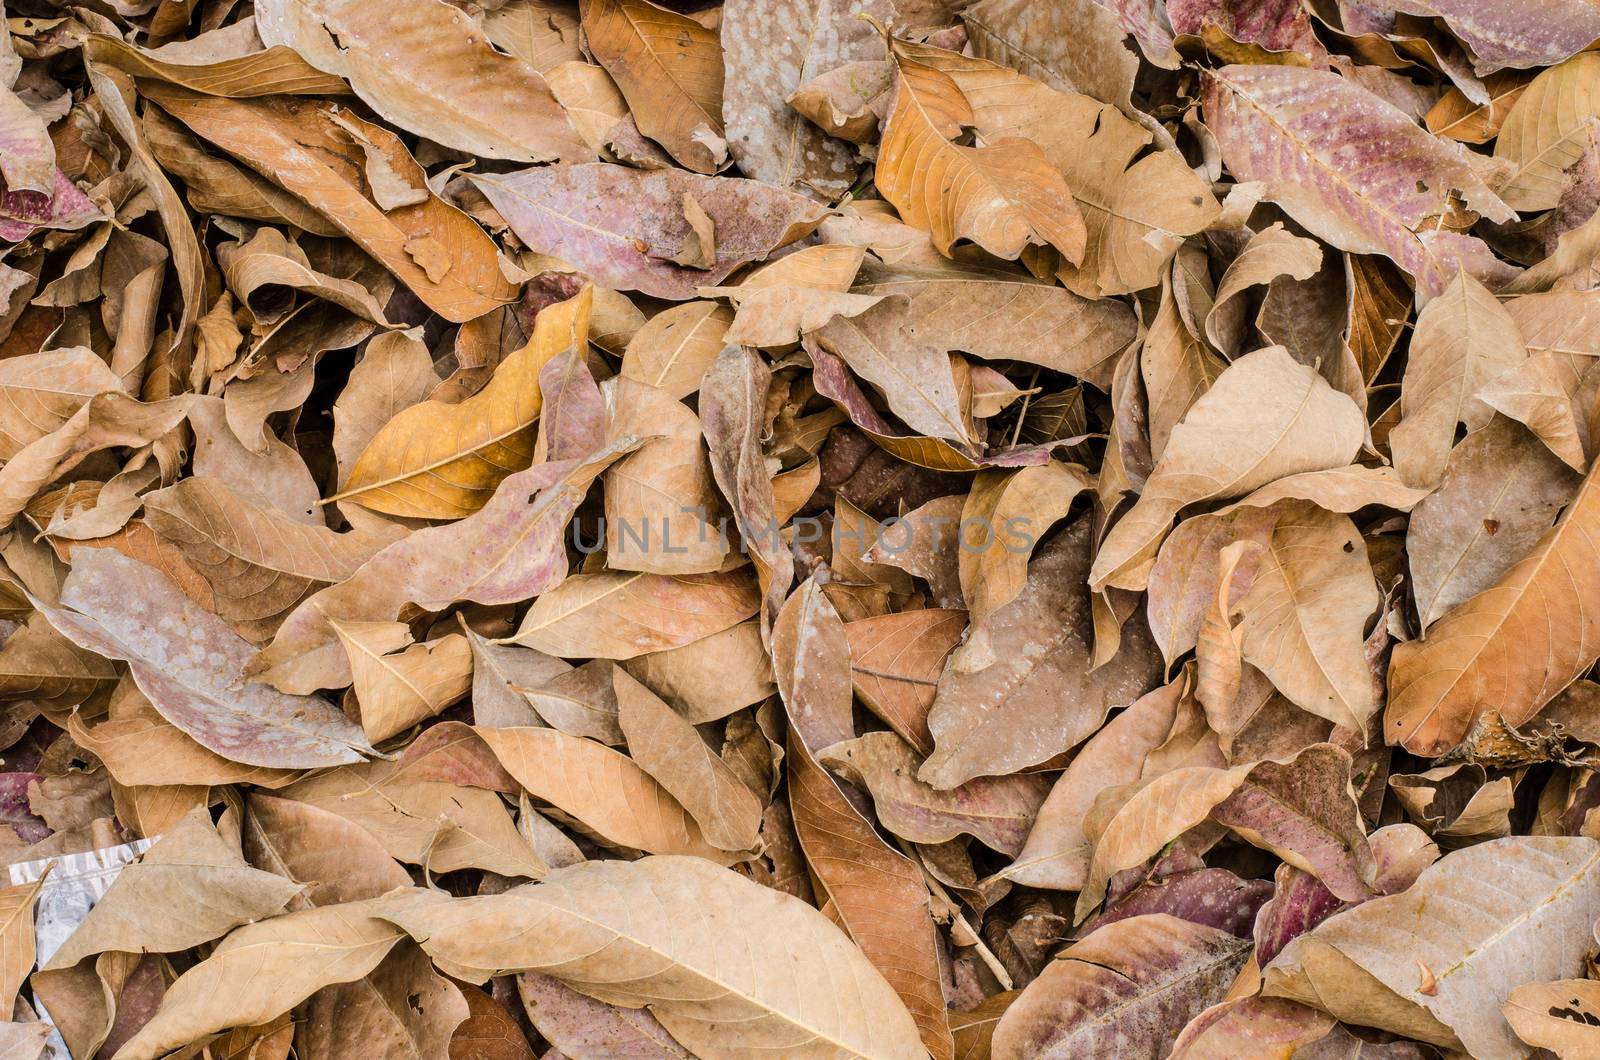  fallen leaves  on the ground. by photobyphotoboy